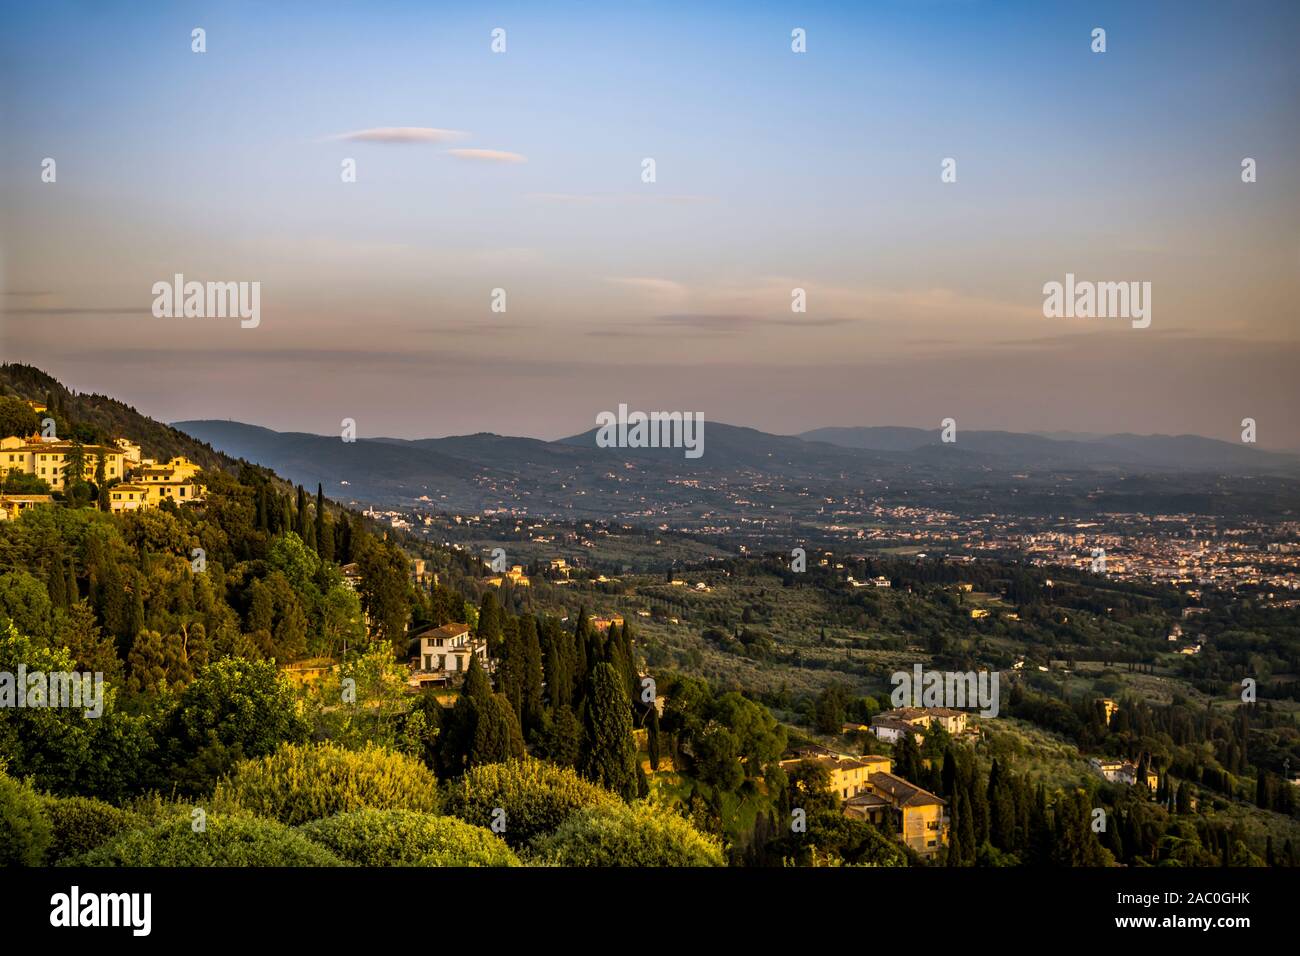 Tuscany. Panorama on the Tuscan Landscape at Sunset - view from Fiesole near Florence. Italy Stock Photo